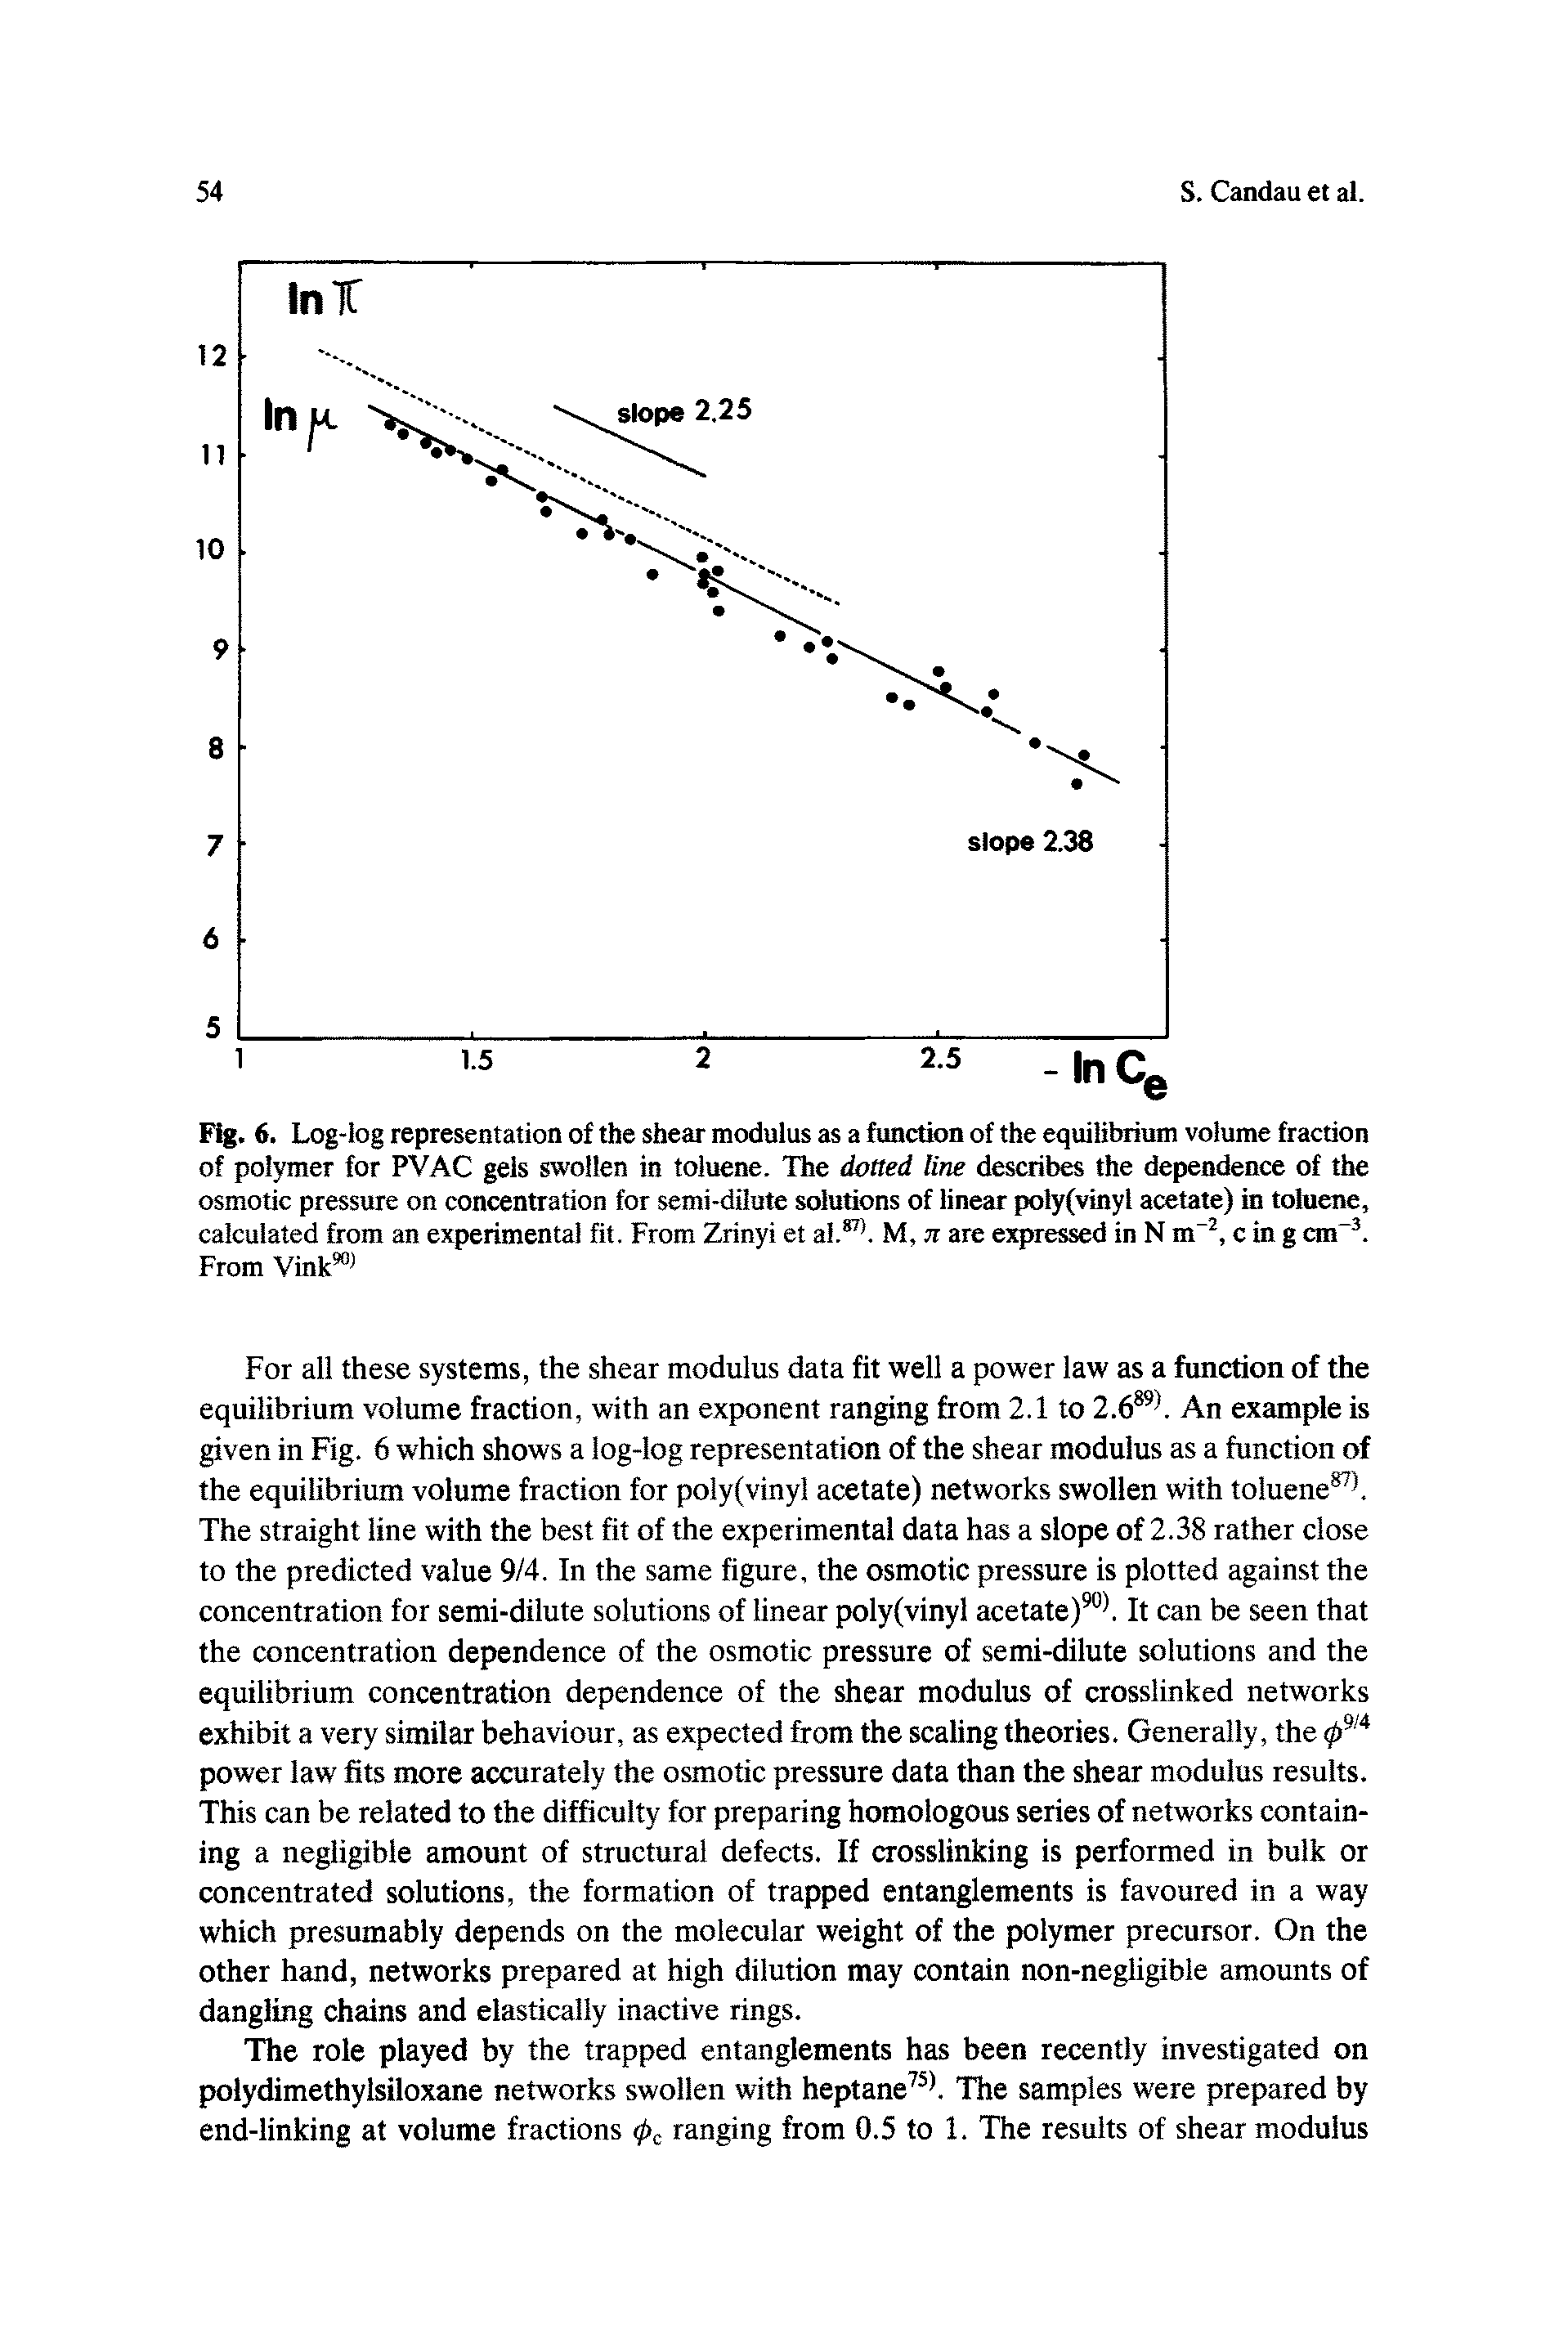 Fig. 6. Log-log representation of the shear modulus as a functkin of the equilibrium volume hraction of polymer for PVAC gels swollen in toluene. The dotted line describe the dependence of the osmotic pressure on concentration for semi-dilute solutions of linear poly(vinyl acetate) in toluene, calculated from an experimental fit. From Zrinyi et al.. M, ti are expressed in N m , c in g cm . From Vink ...